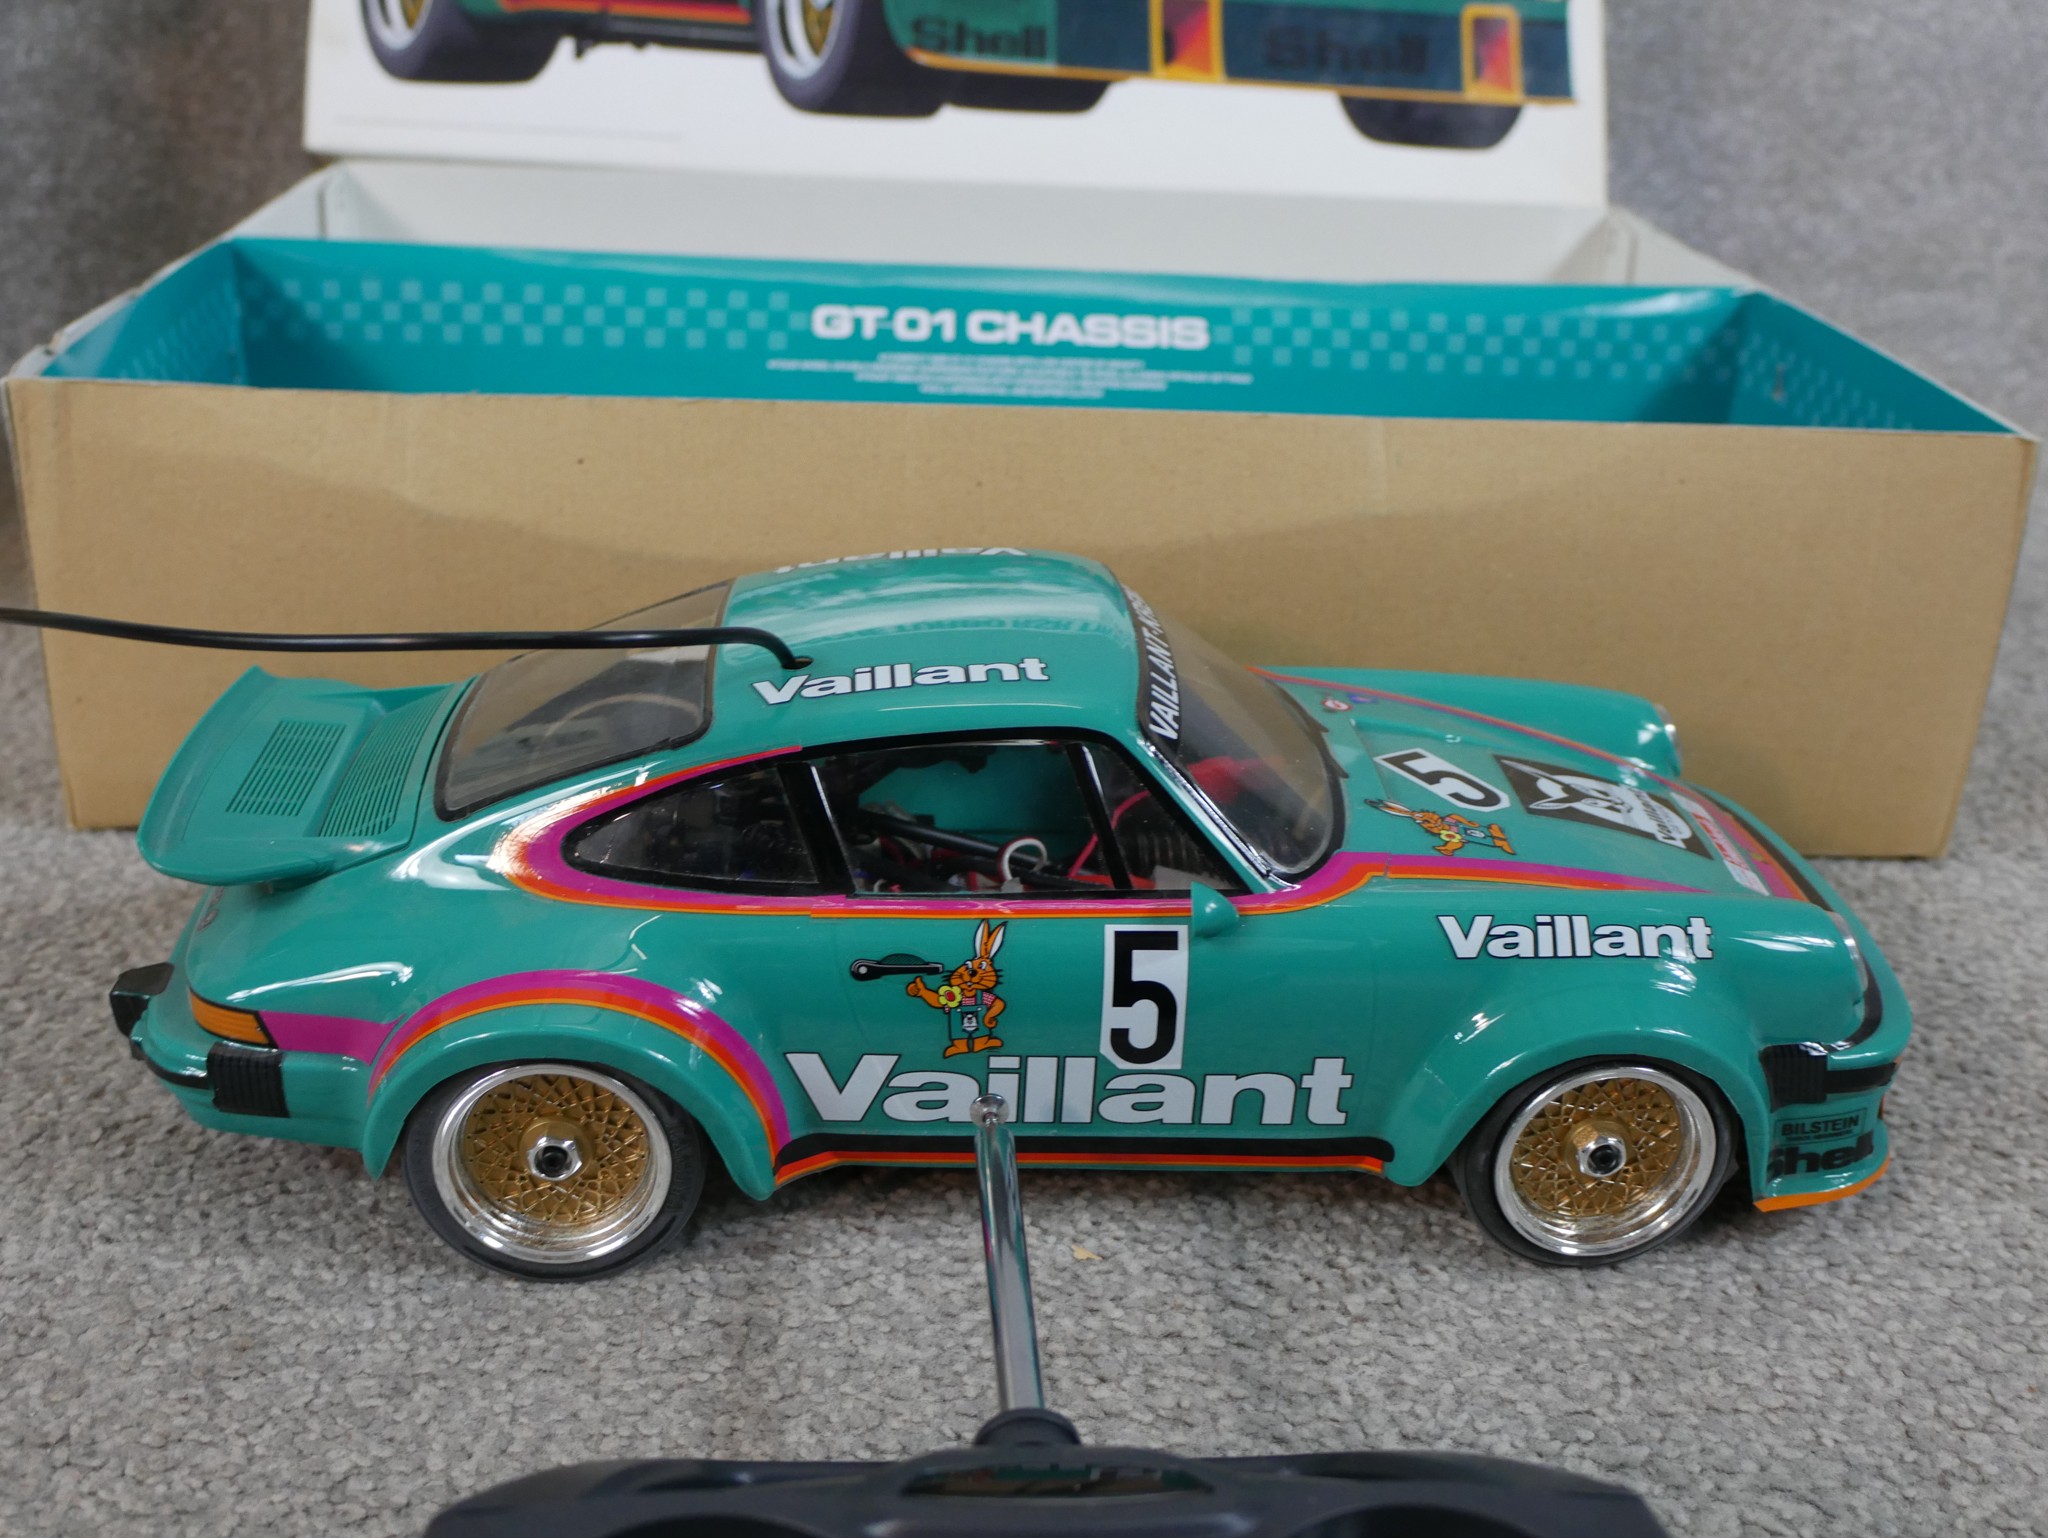 Two boxed scale model cars to include Panda 1:10 AMG Mercedes Benz & Tamiya 1:12 Porsche Turbo RSR - Image 8 of 8